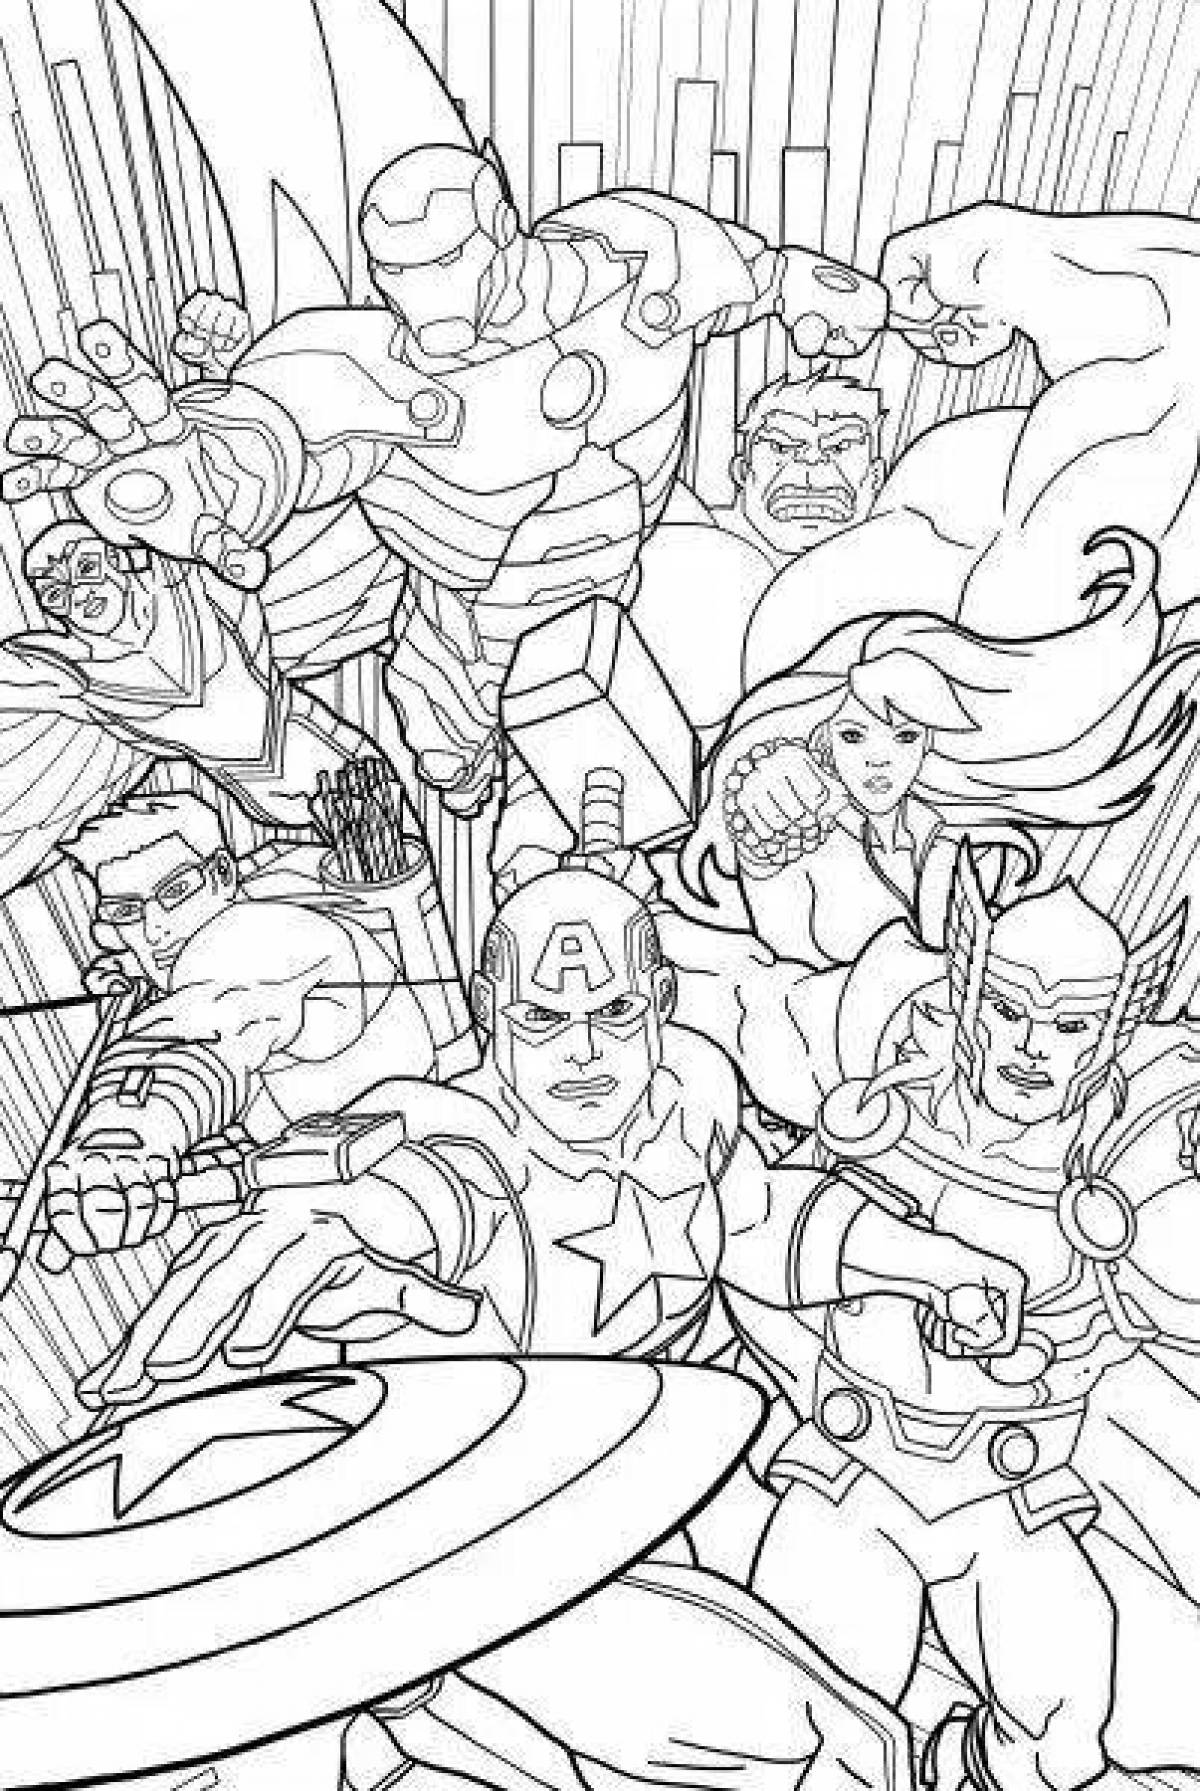 Palatial coloring page avengers finale